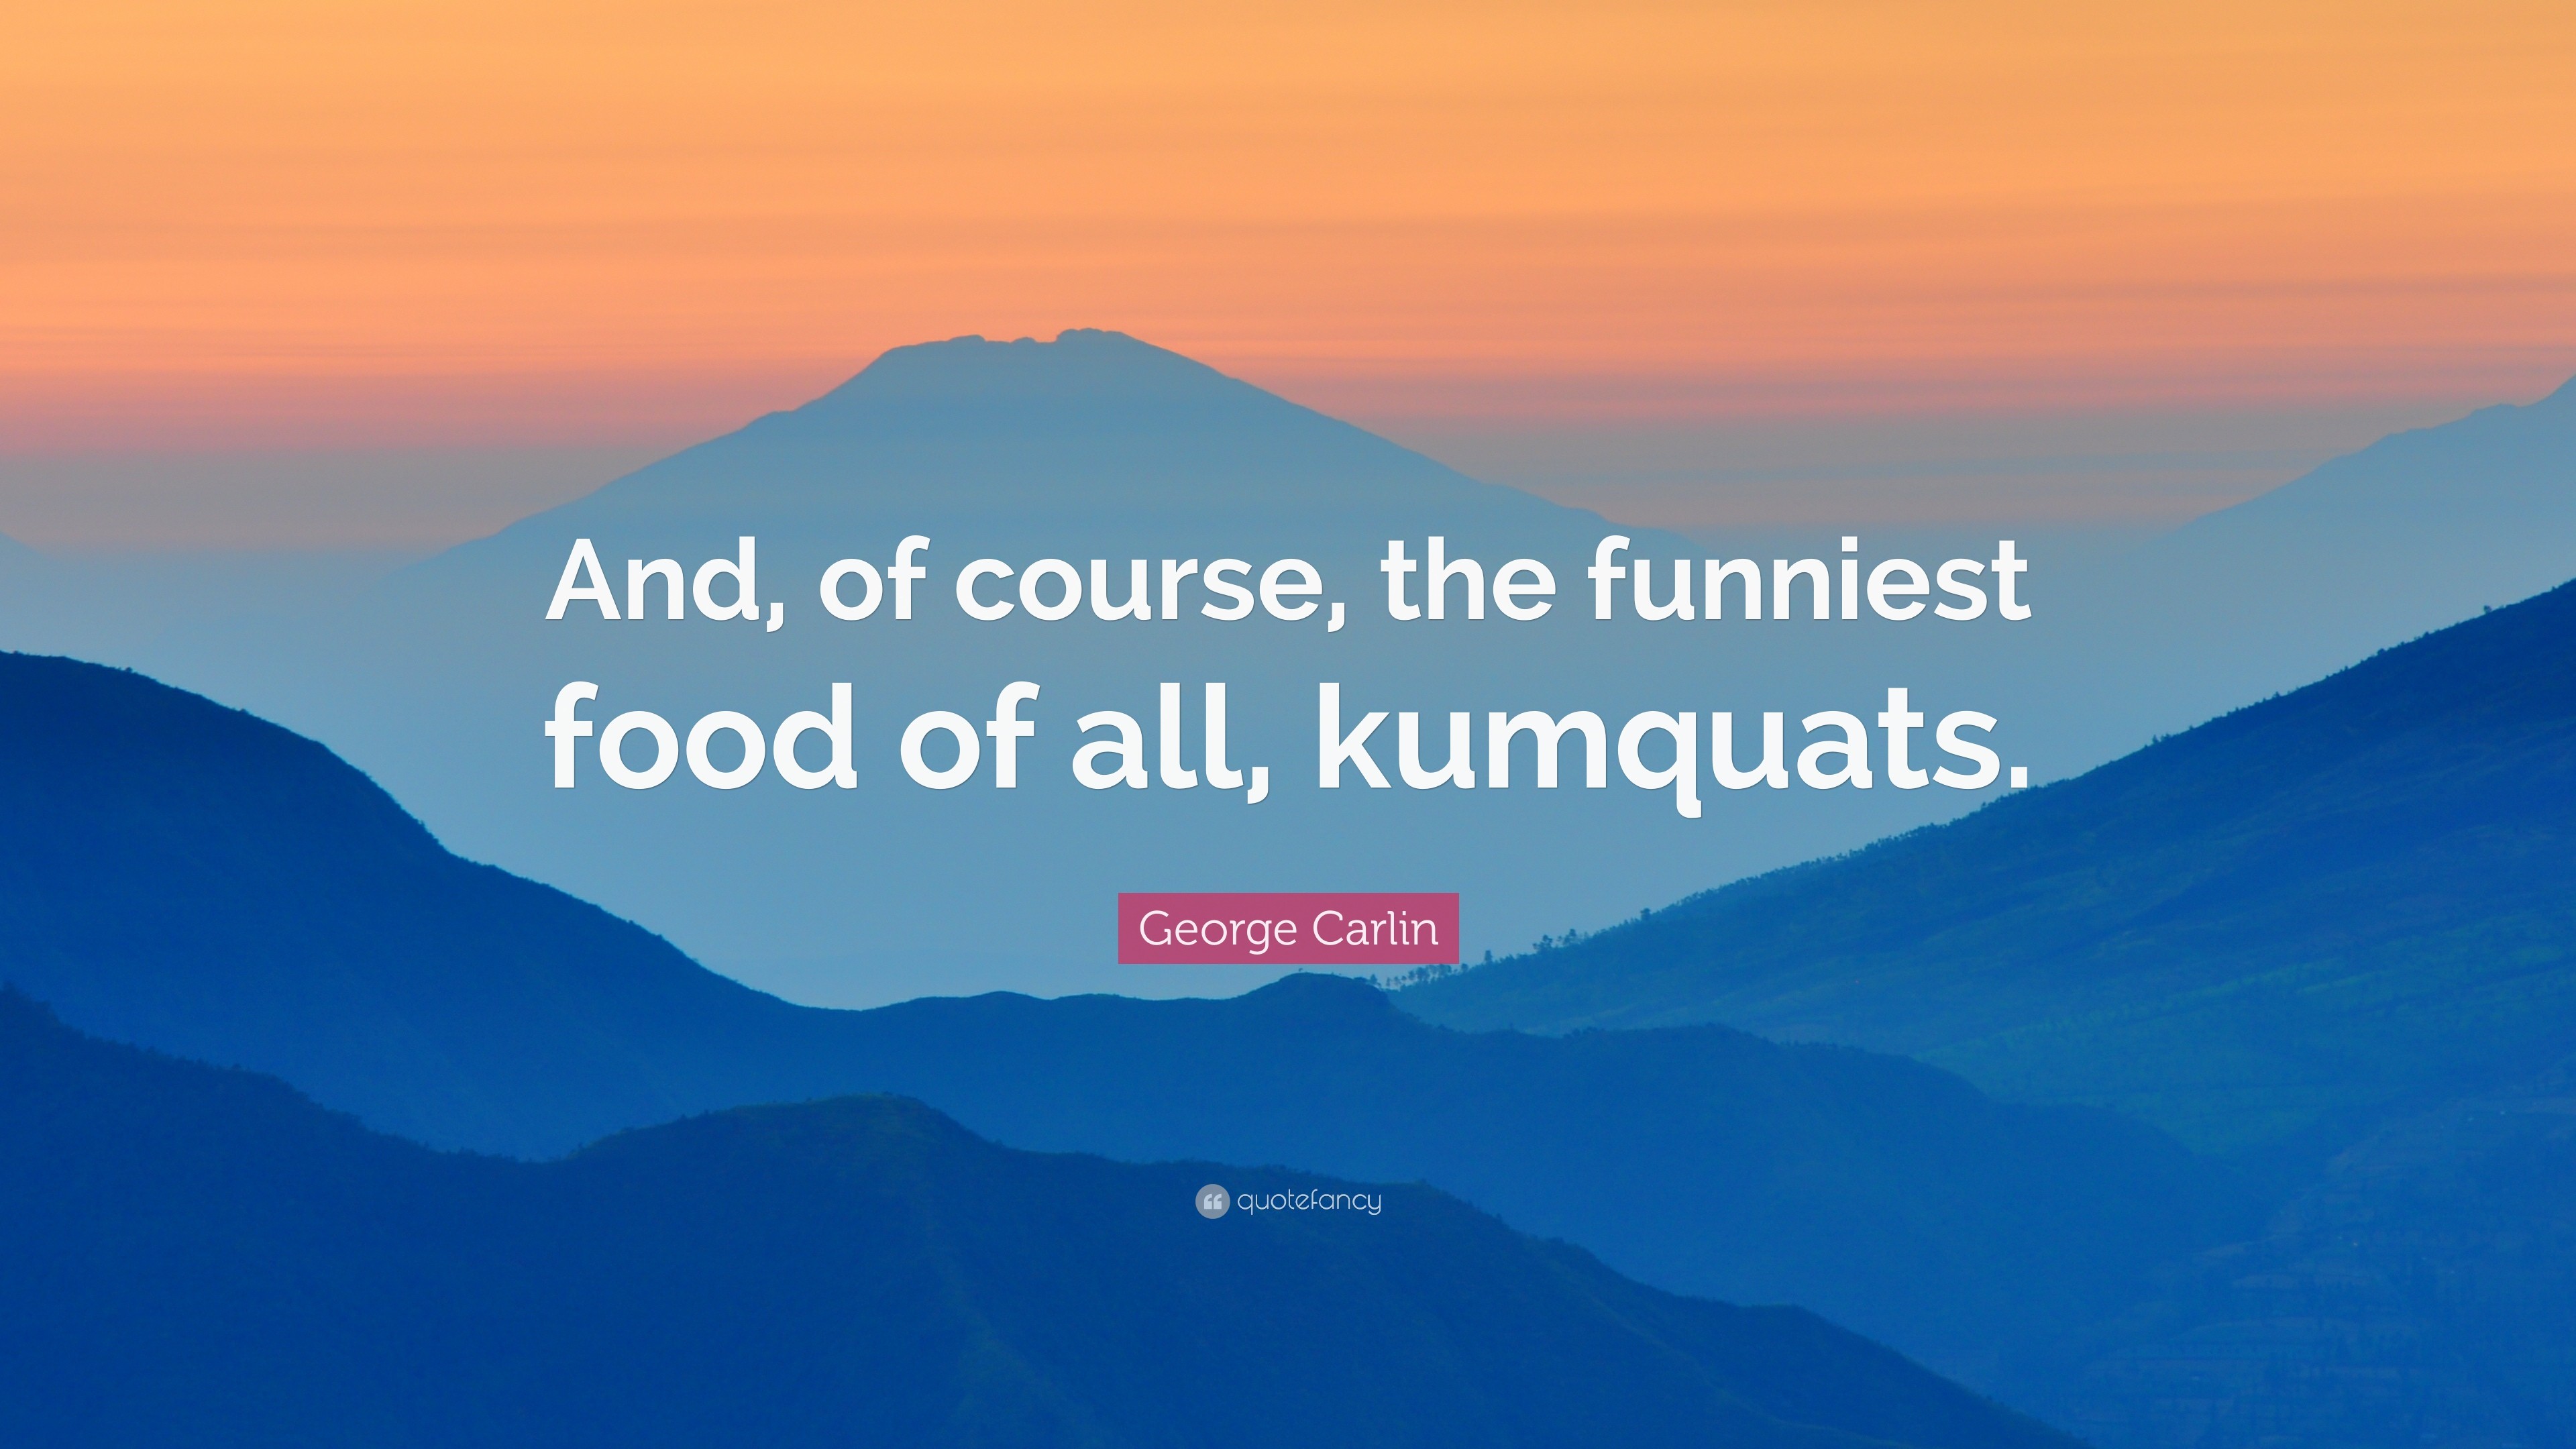 3840x2160 George Carlin Quote: “And, of course, the funniest food of all,